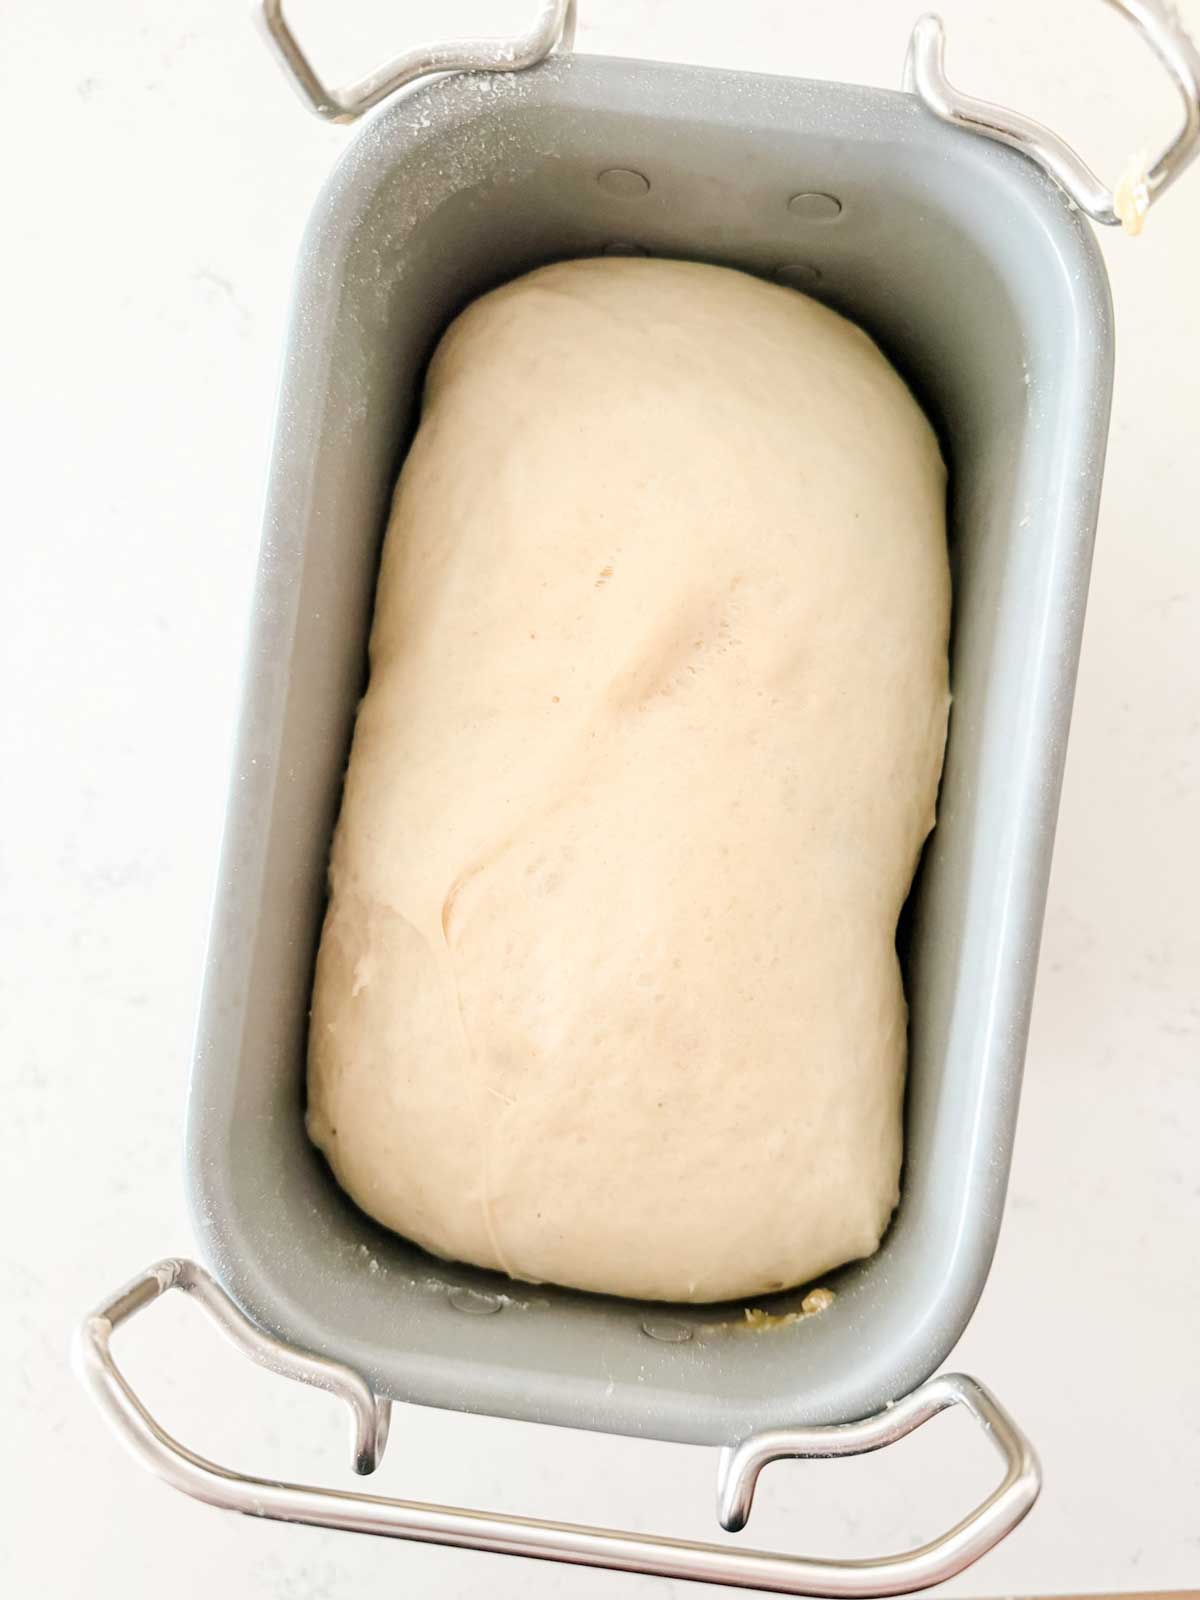 Pizza dough in a bread machine ready to roll out.